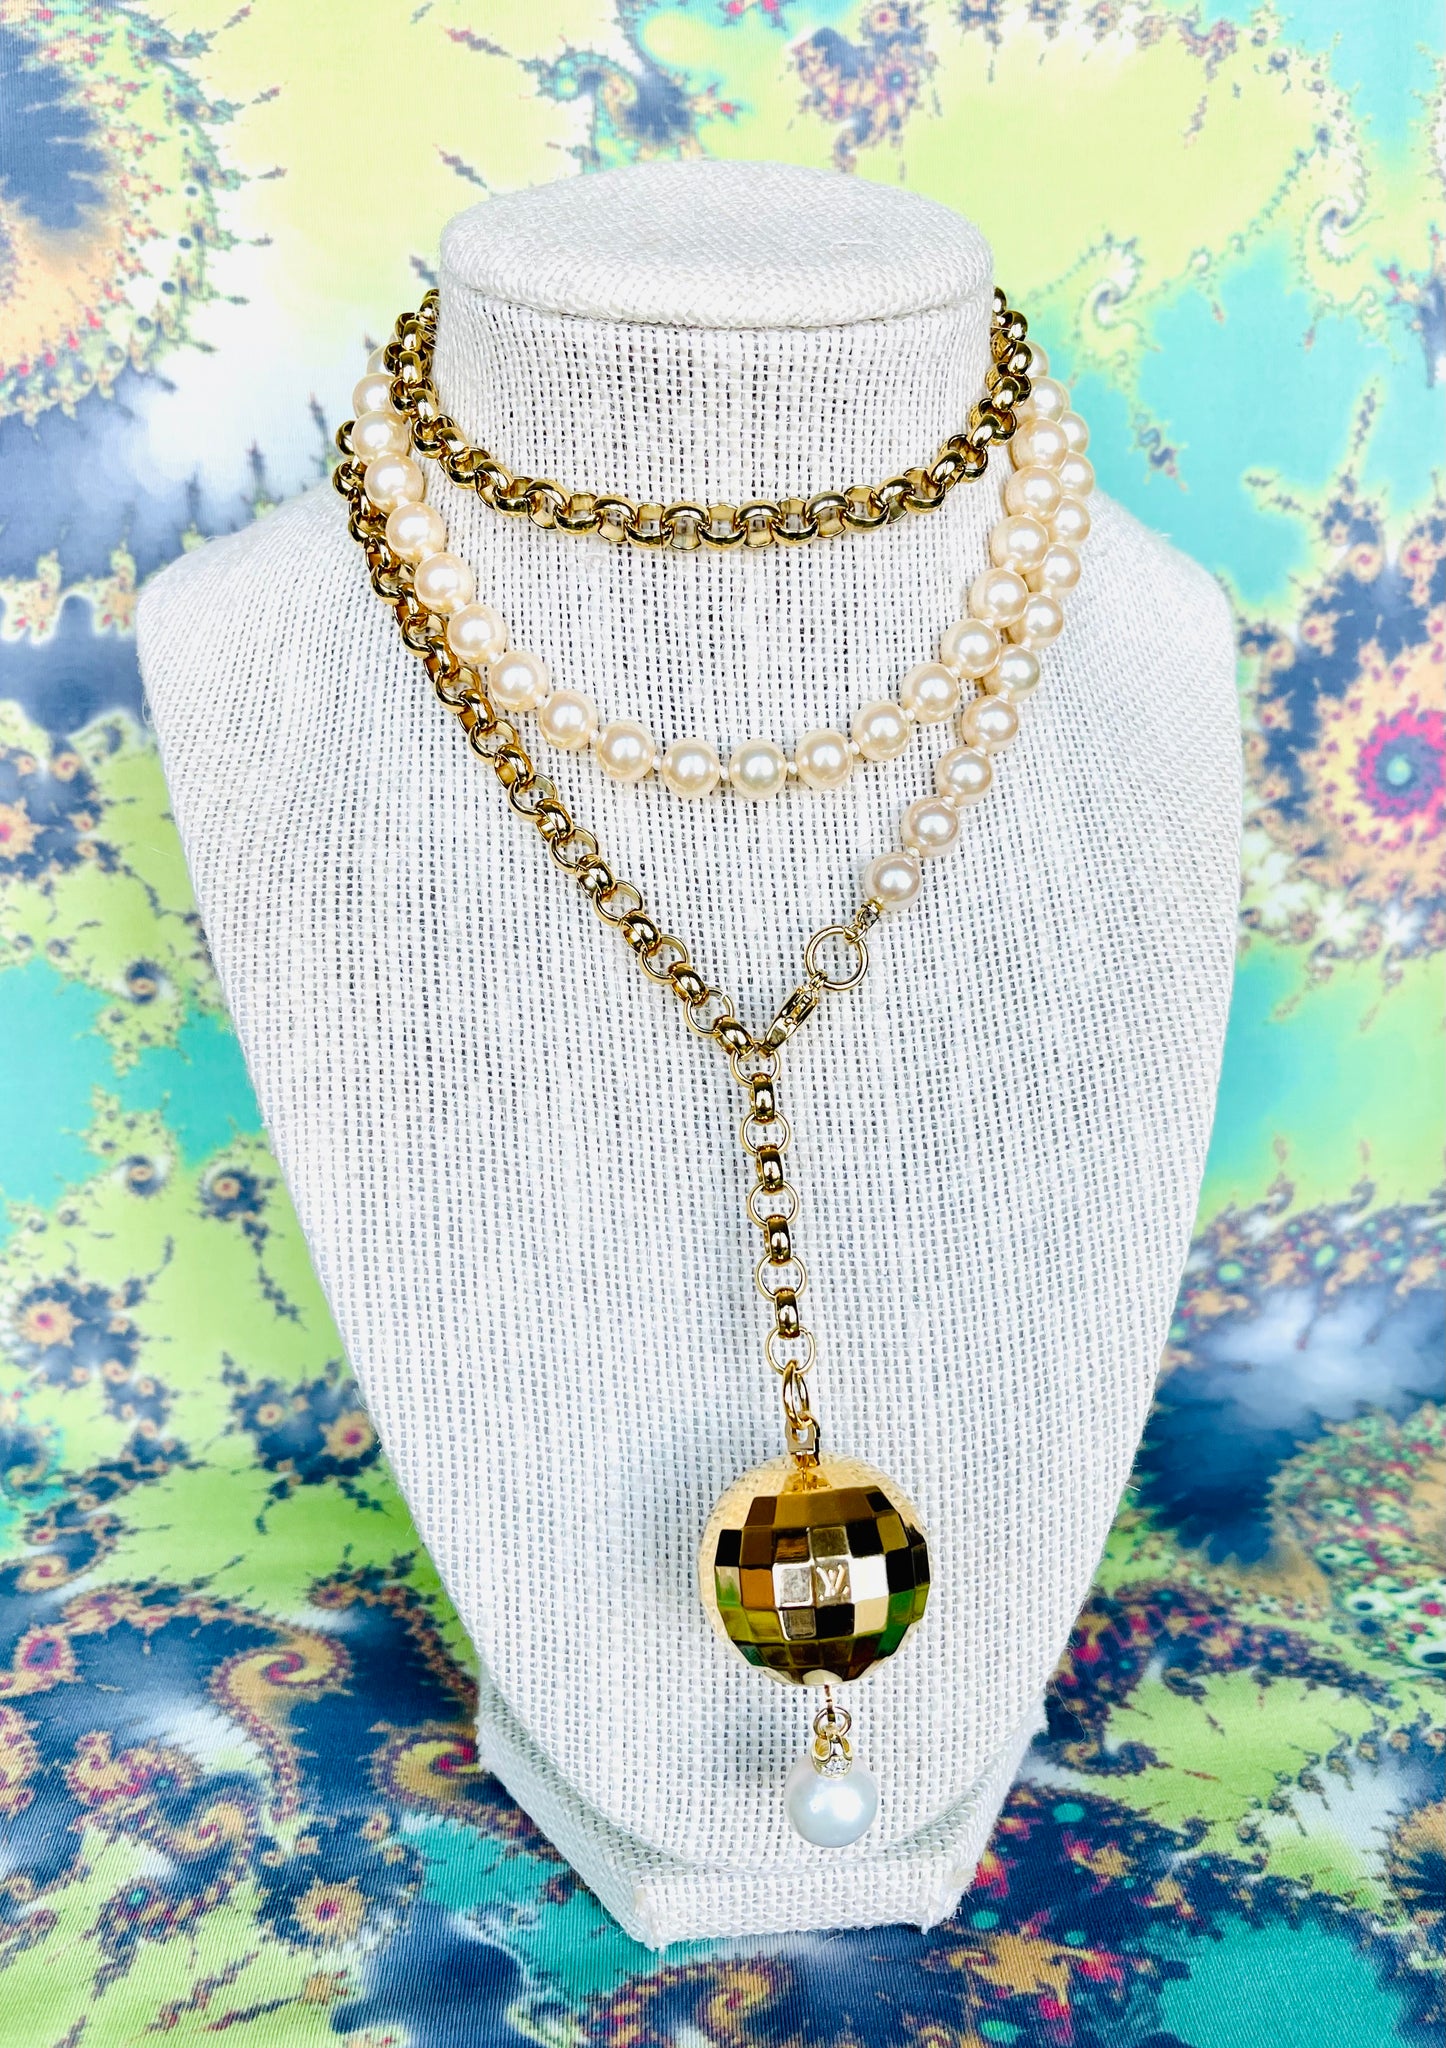 Upcycled YSL bead necklace